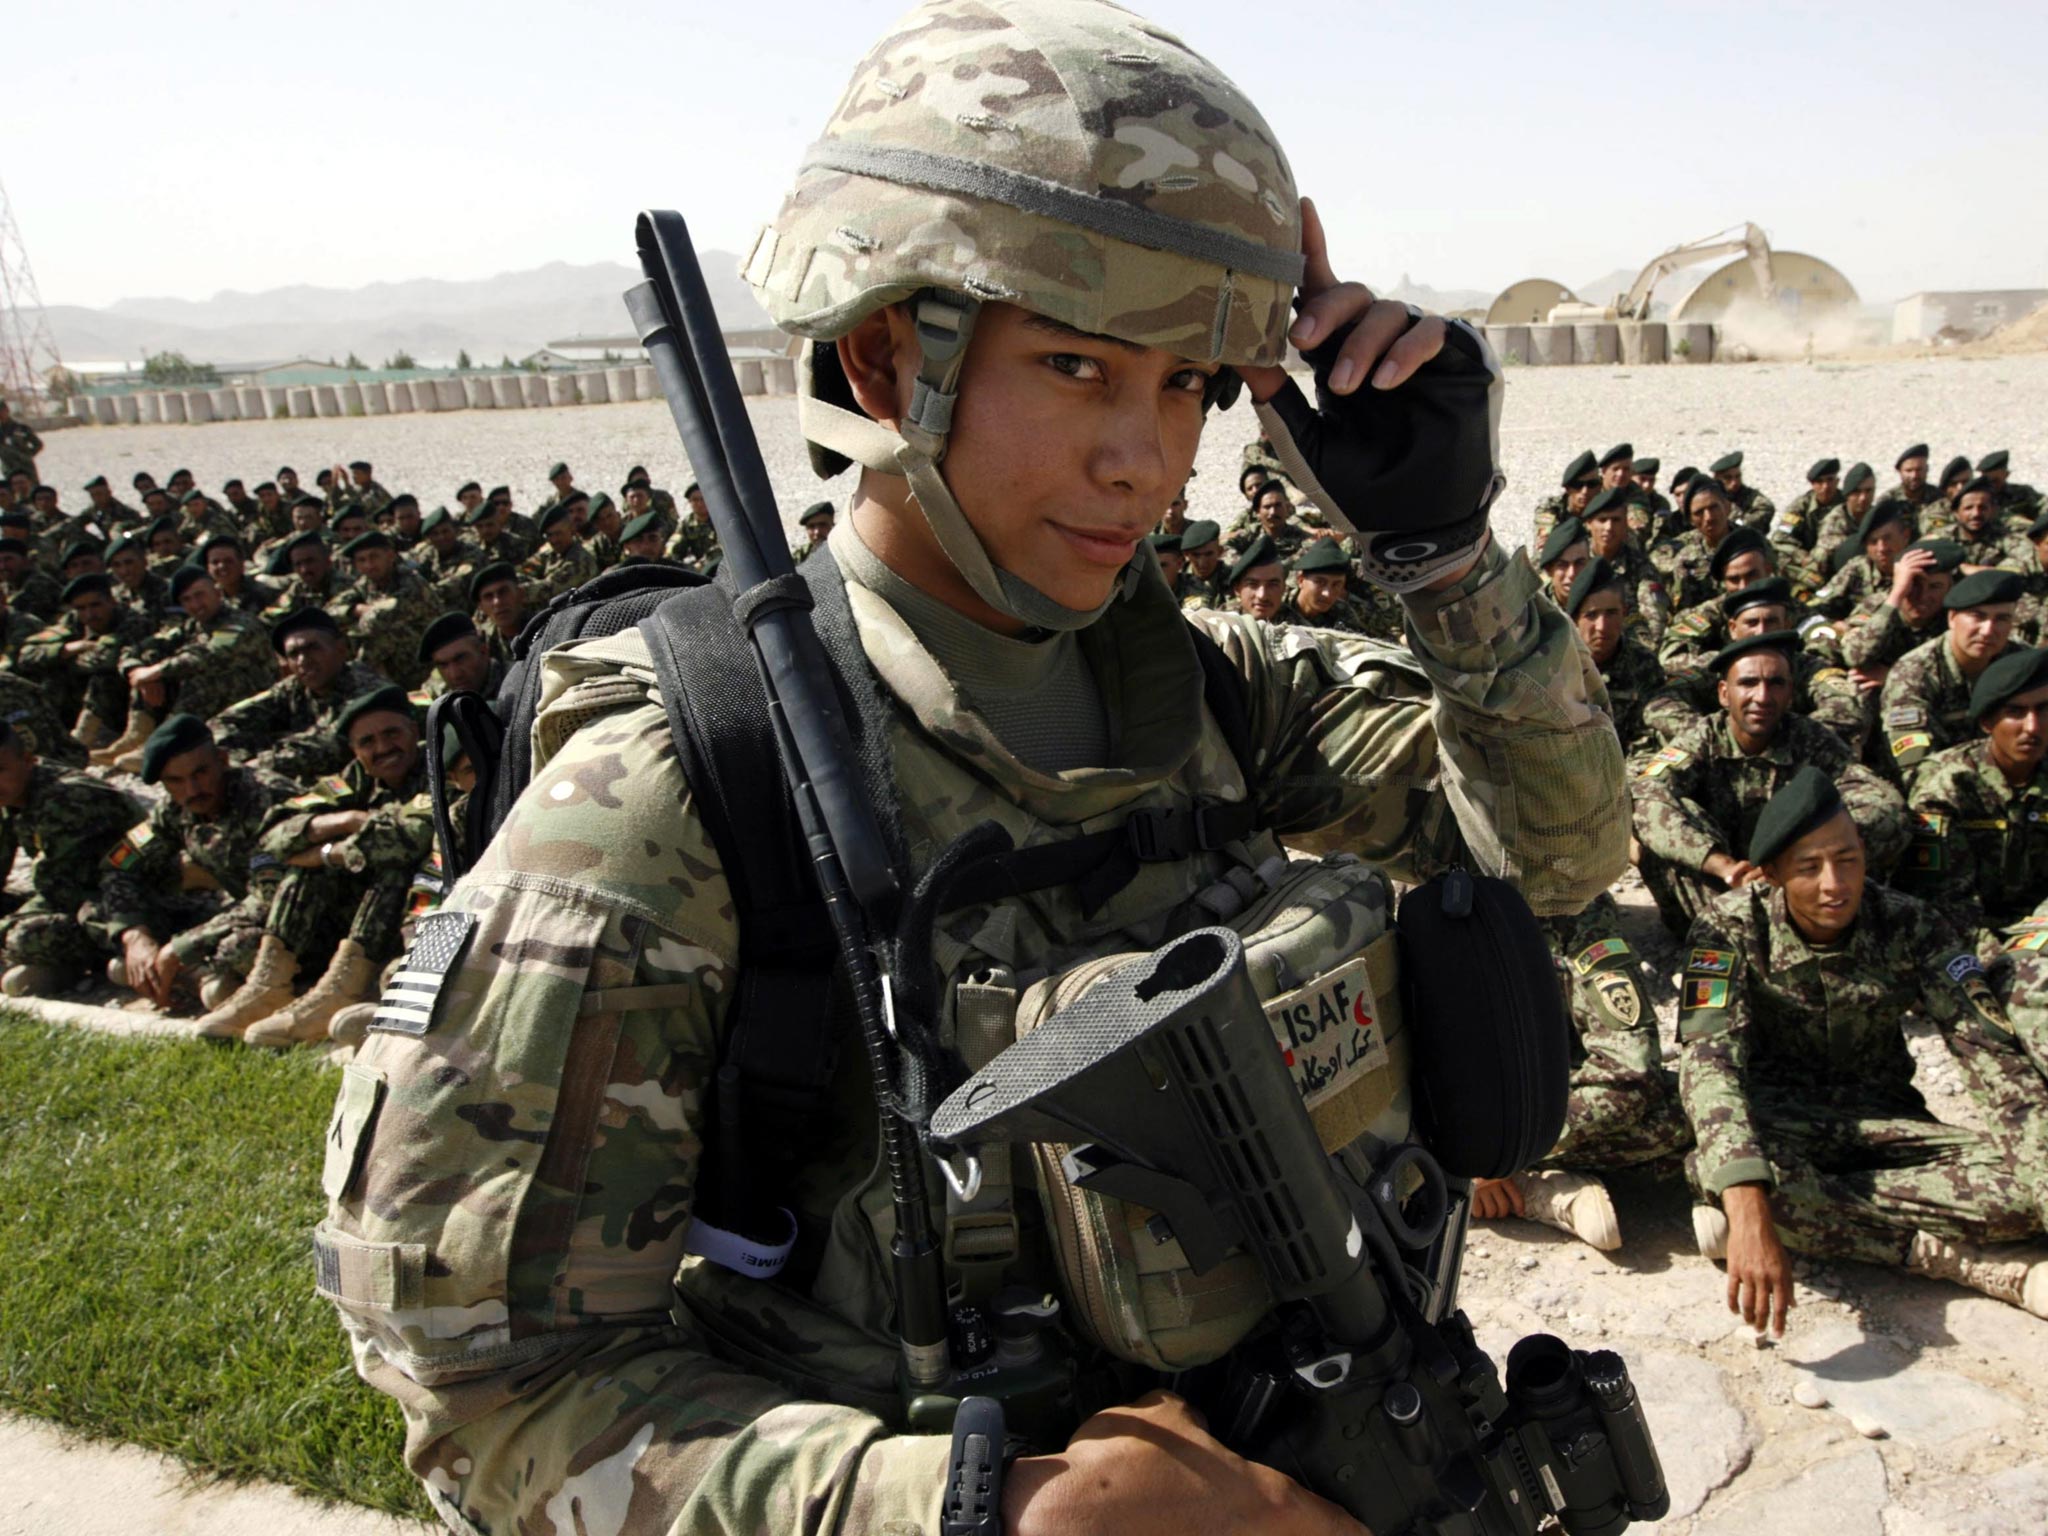 The US army could shrink to its smallest size in decades